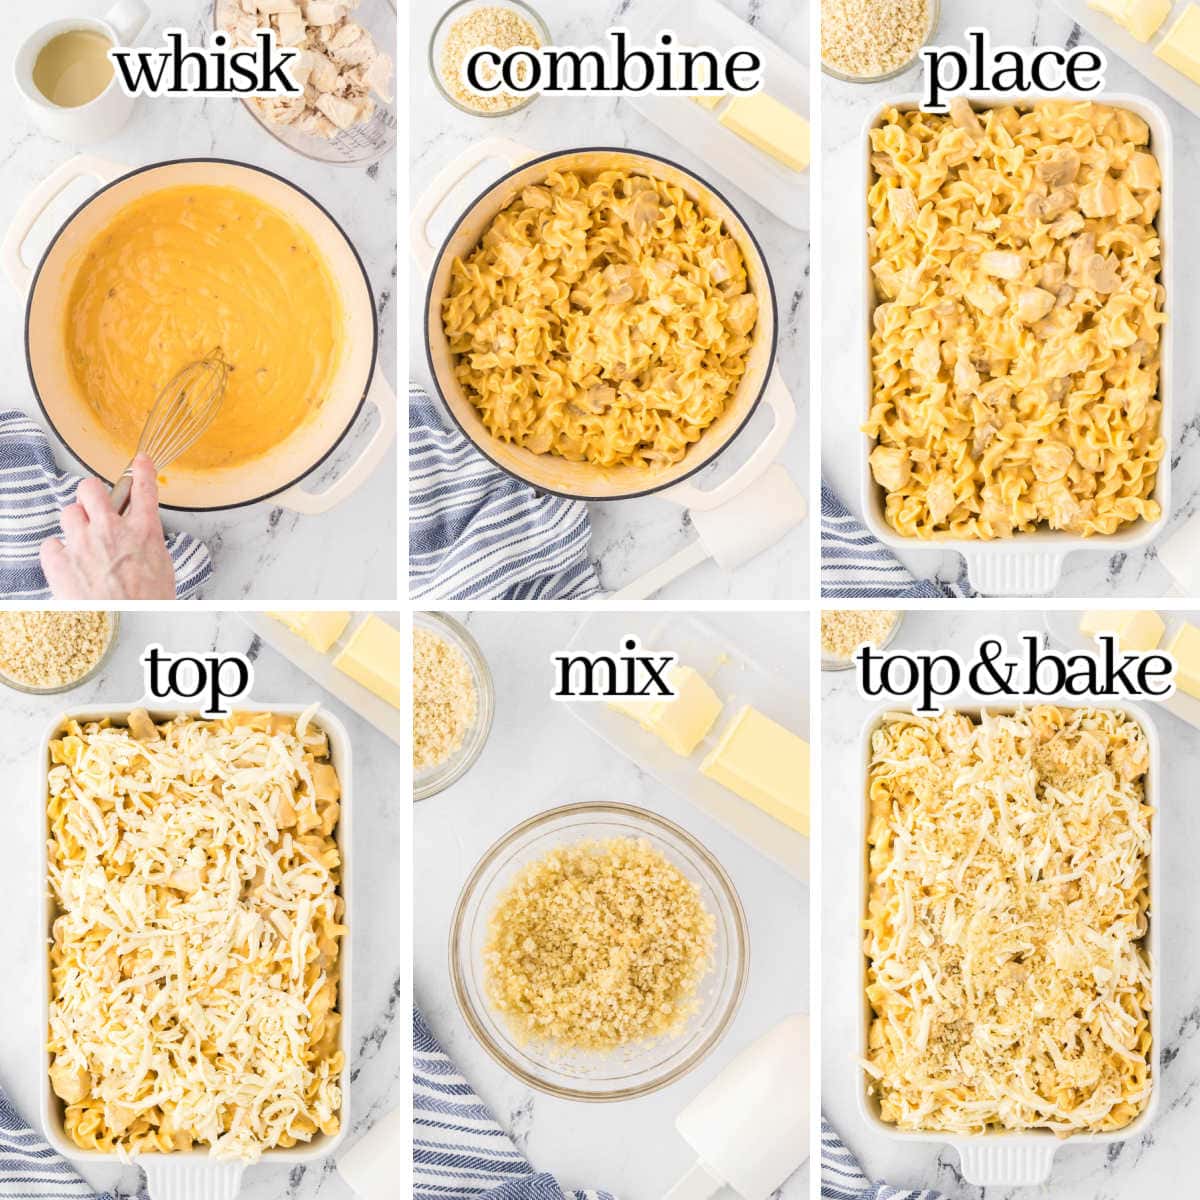 Step by step instructions to make casserole recipe. With print overlay.